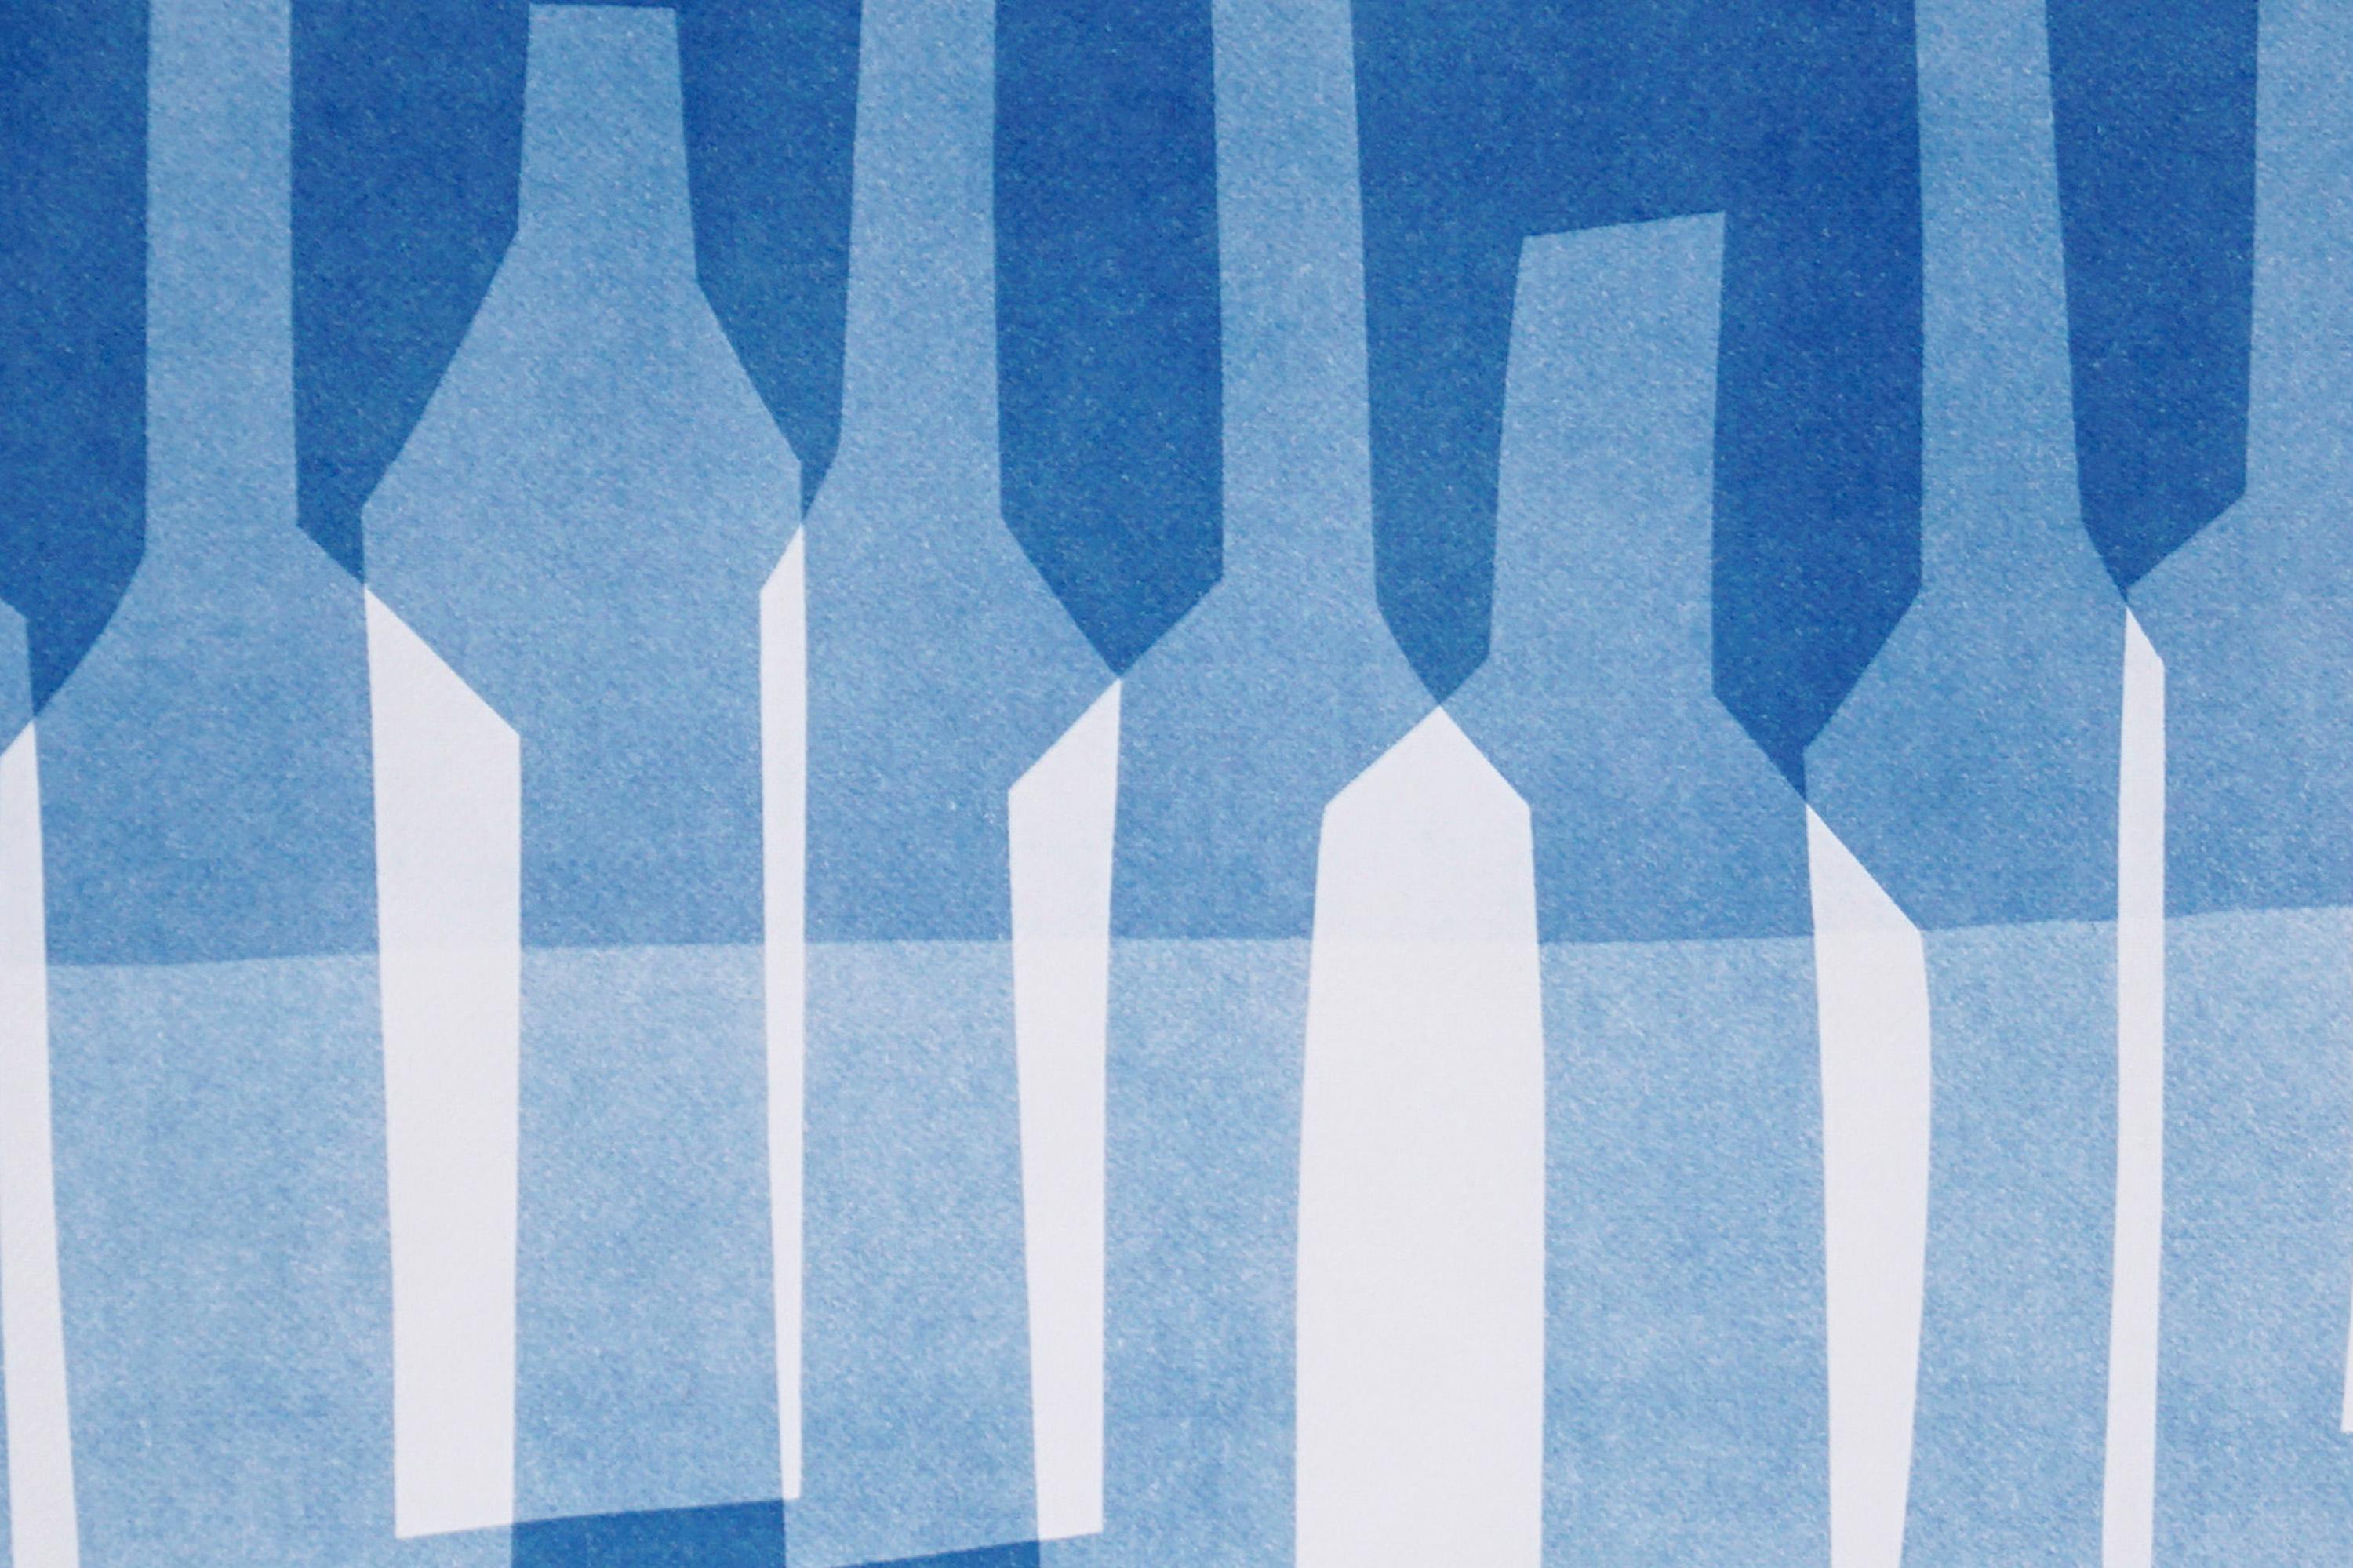 Wine Cellar Still Life in Blue Tones, Abstract Bottles Composition, Cyanotype 2